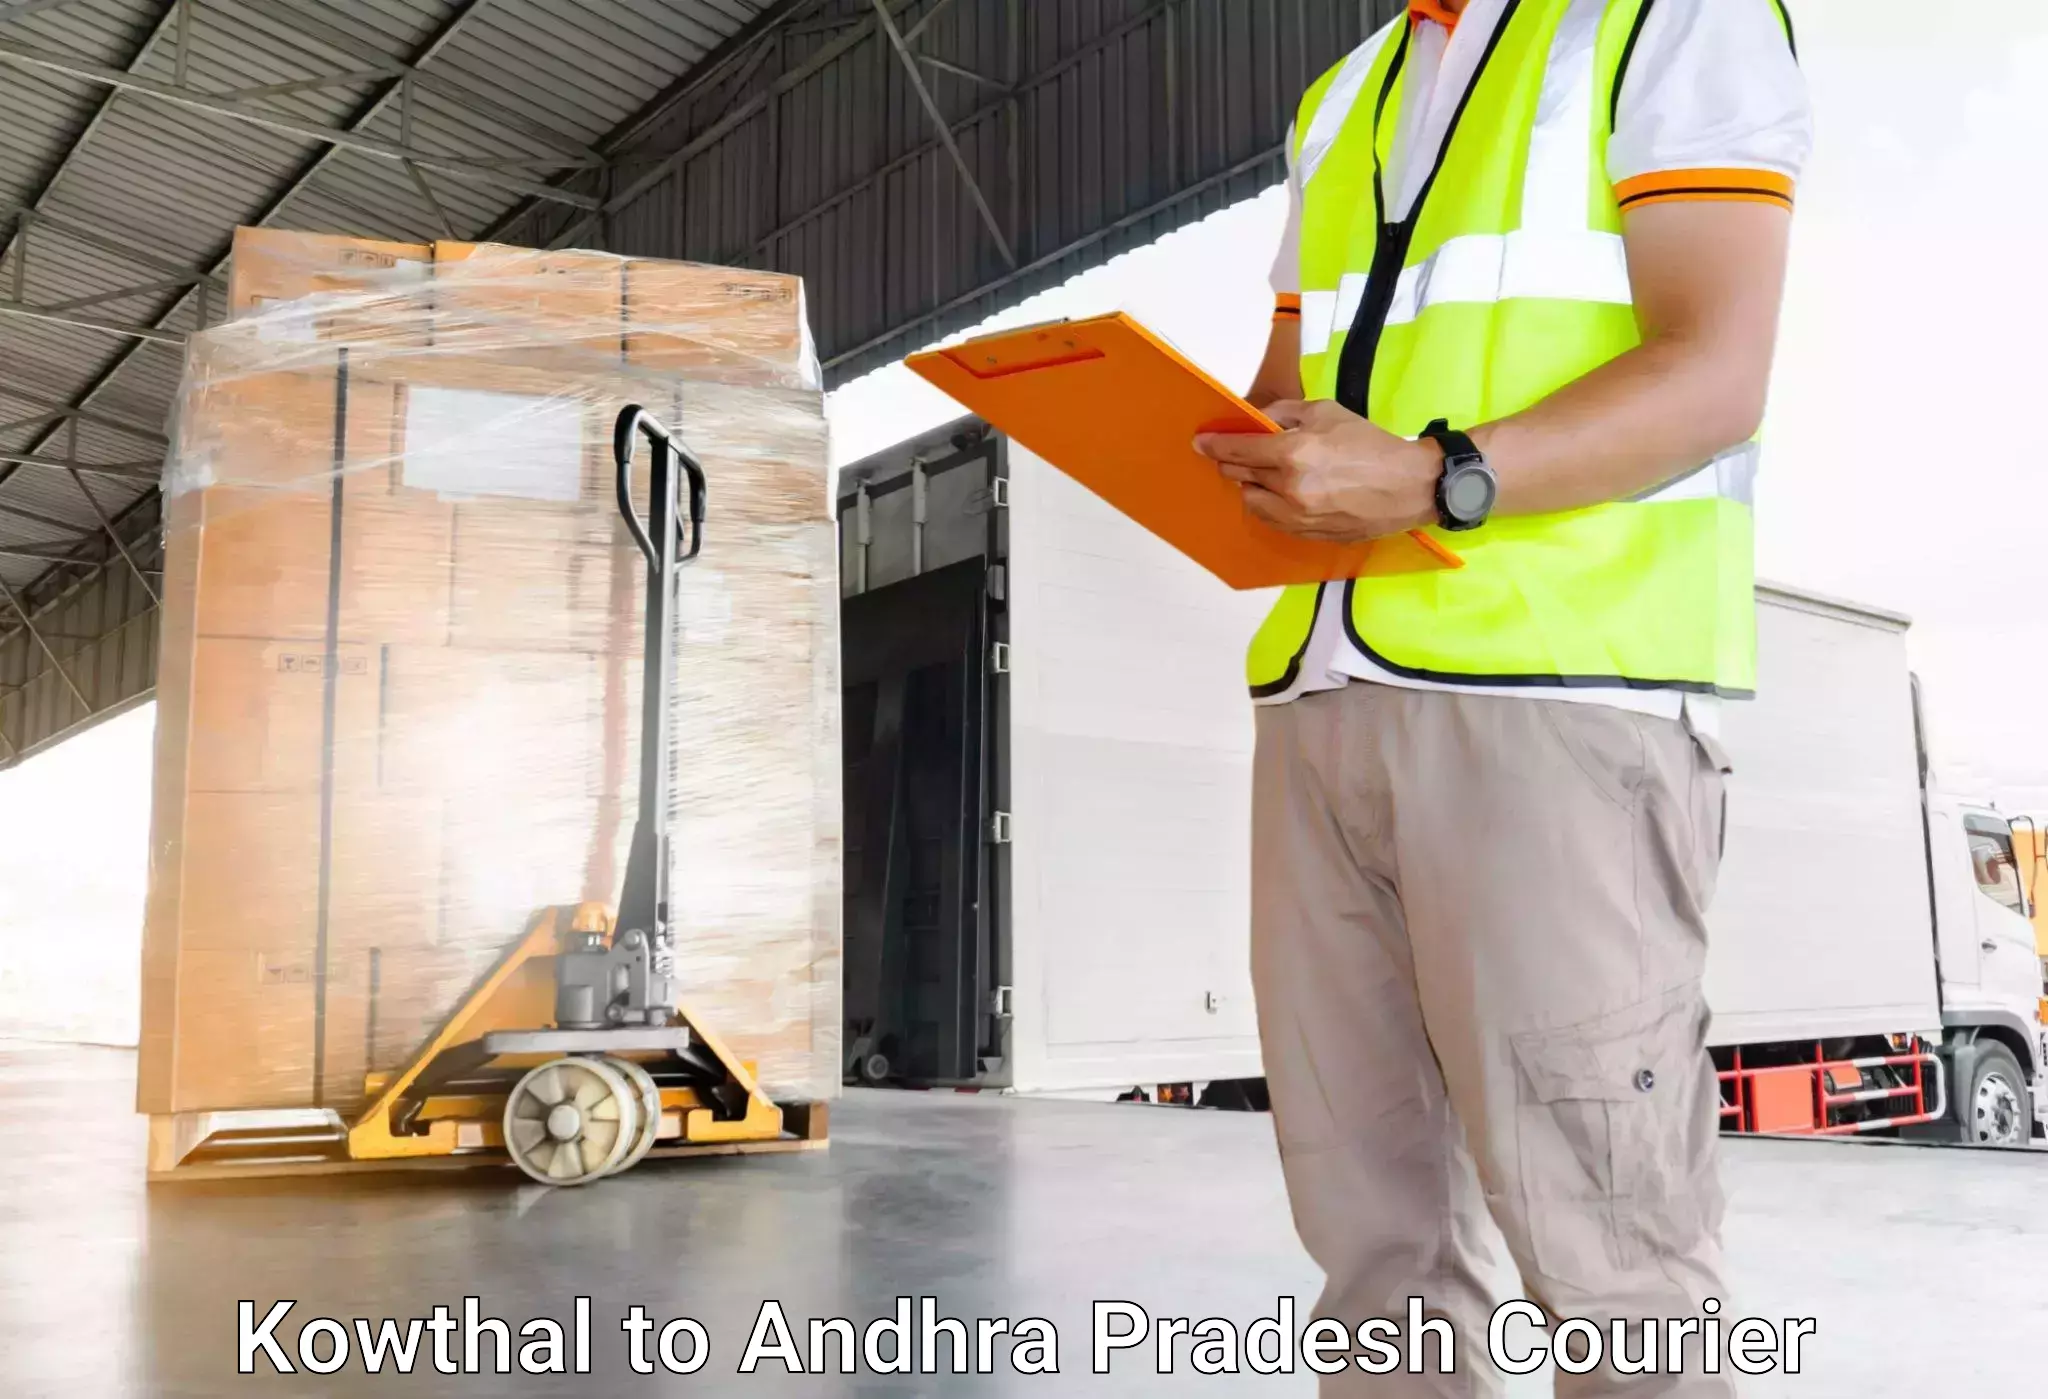 Long distance luggage transport in Kowthal to Andhra Pradesh